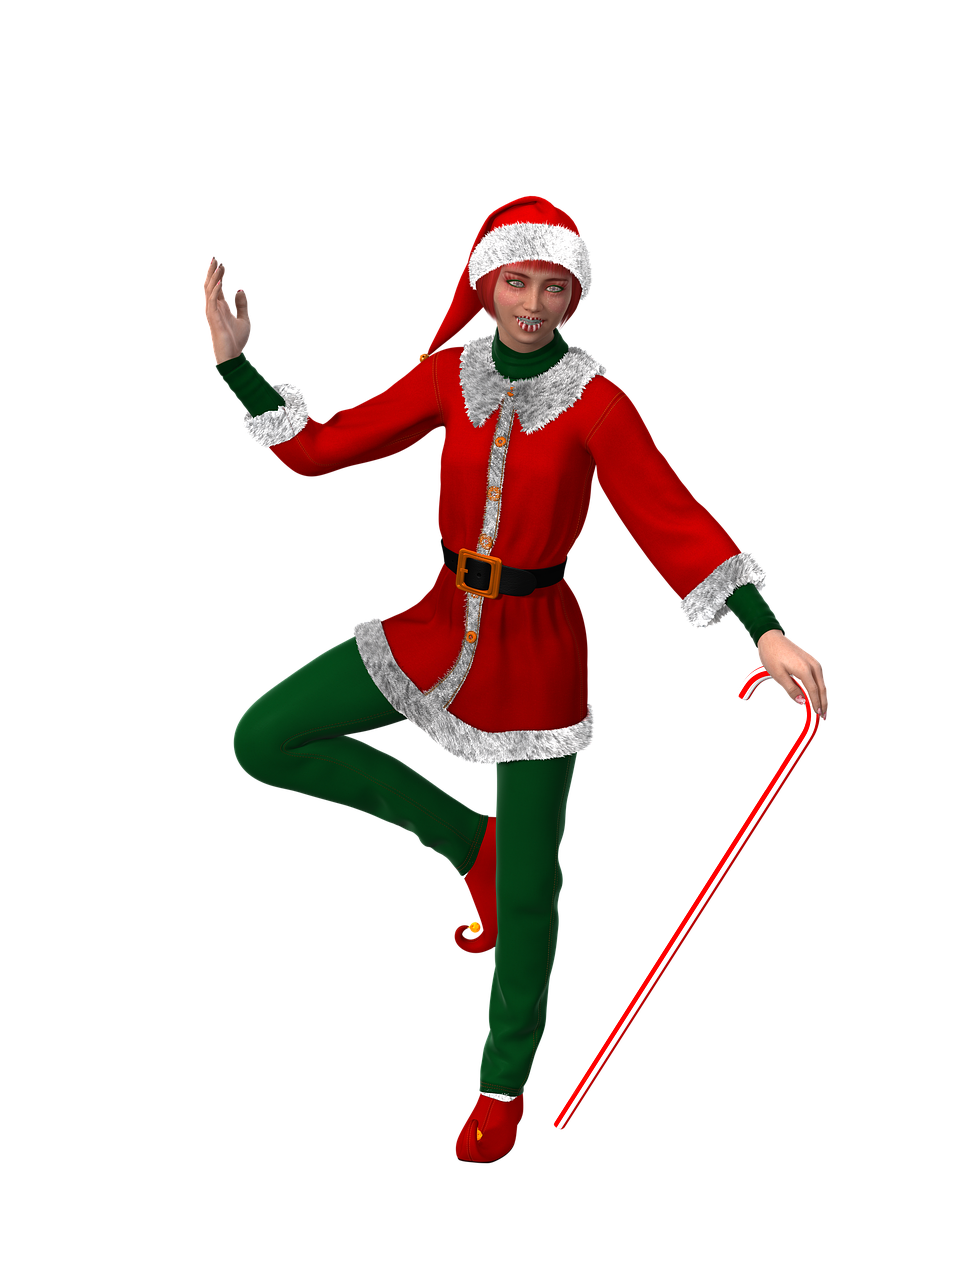 Glove clipart elf clothes. Free image on pixabay